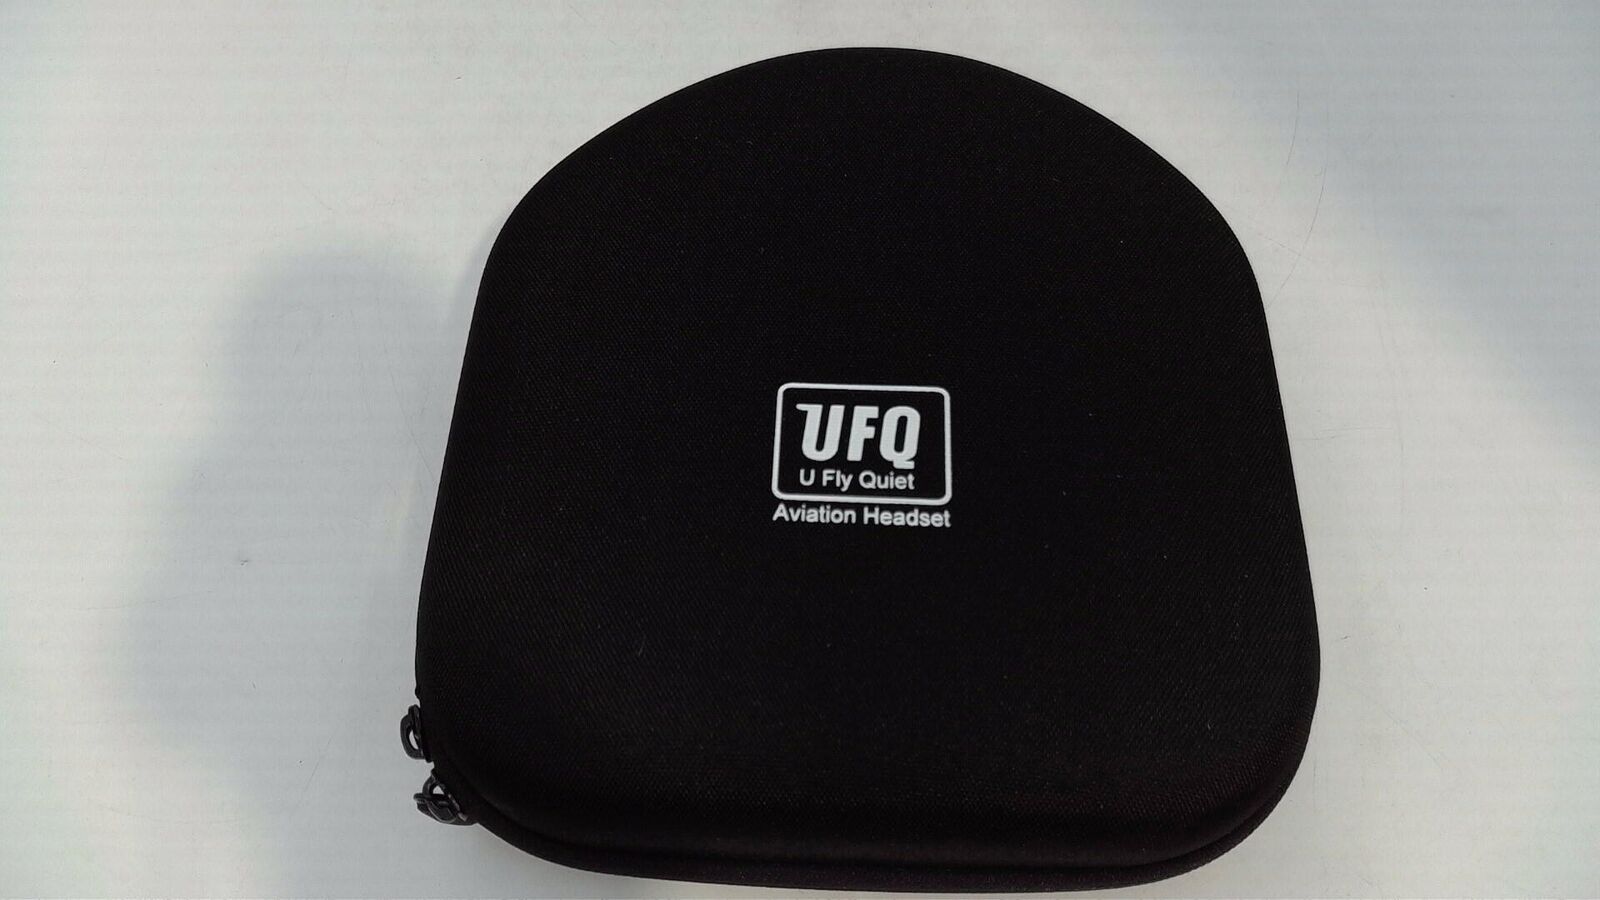 UFQ A7 ANR Aviation Headset- 2021 Version with Metal Shaft More Durable -A7